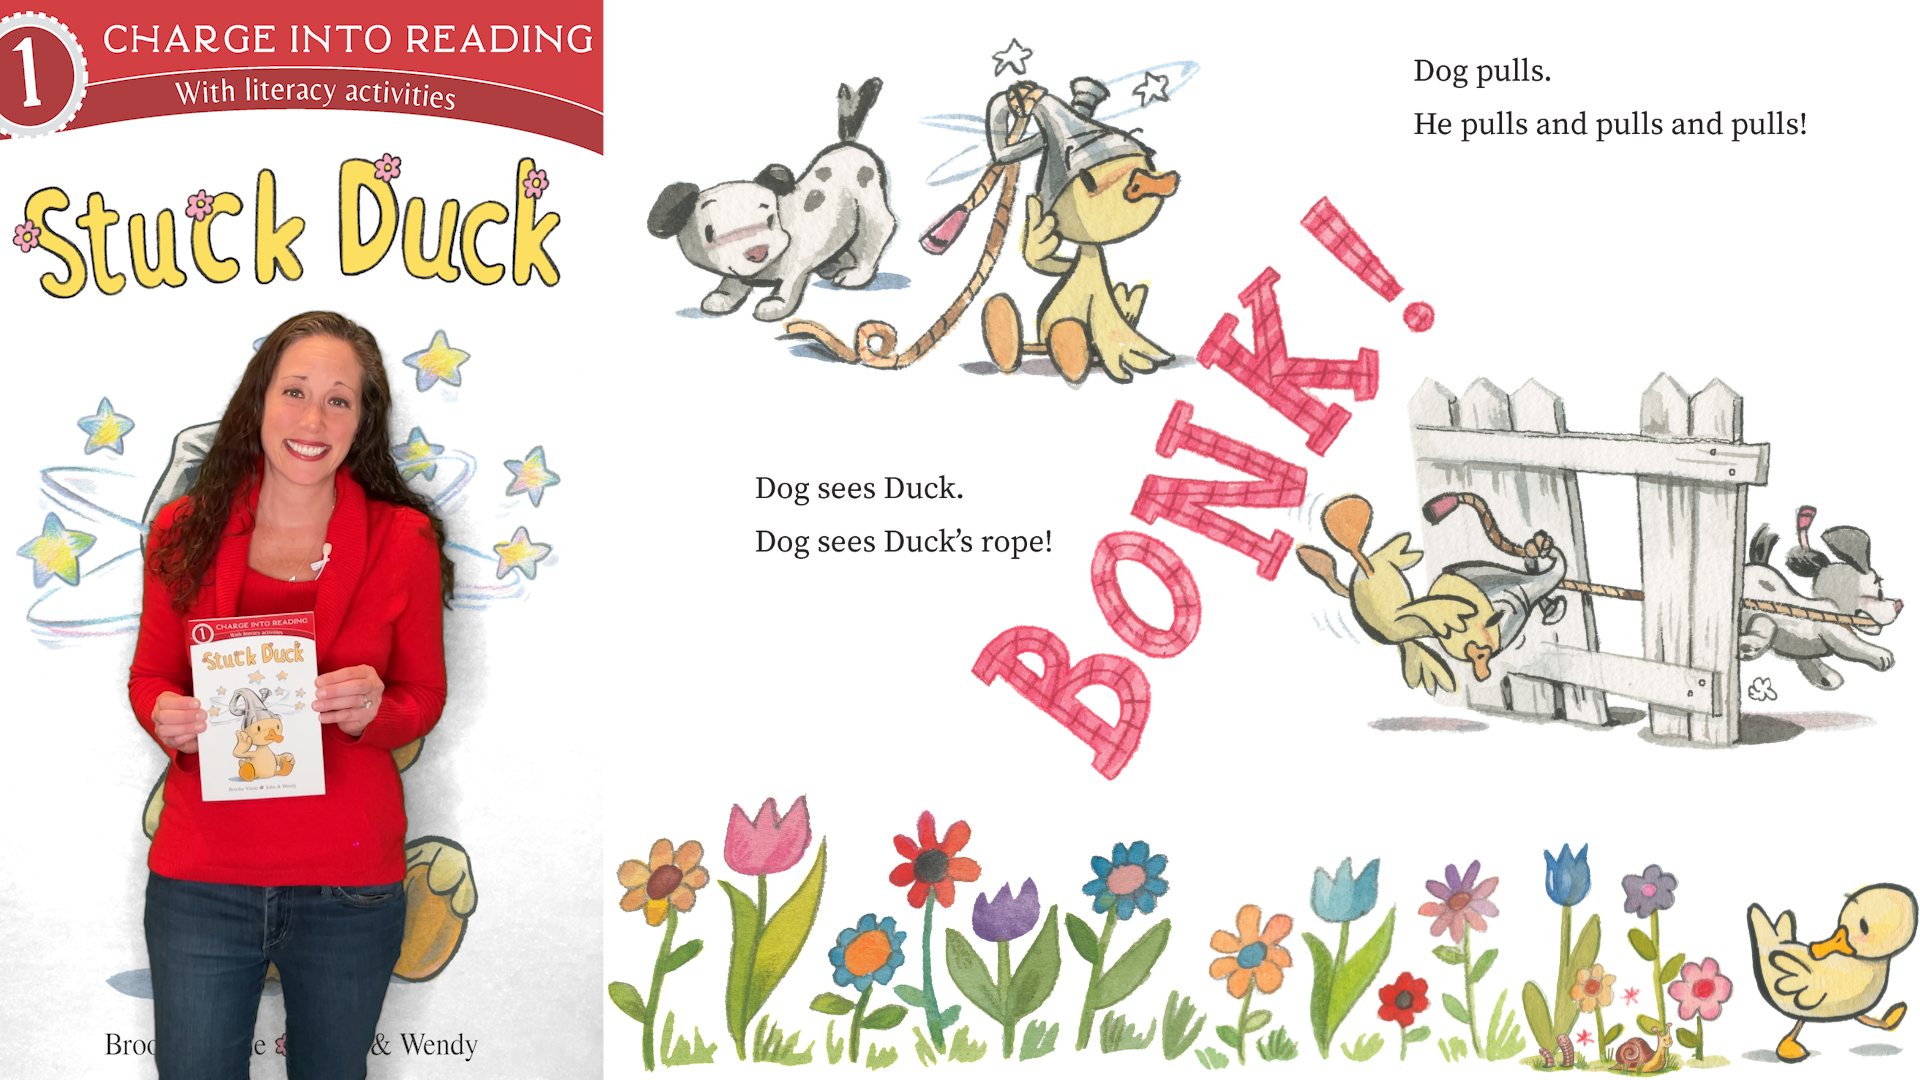 Load video: Stuck Duck by Brooke Vitale: A Book Summary of The Level 1 Early Reader With Literacy Activities